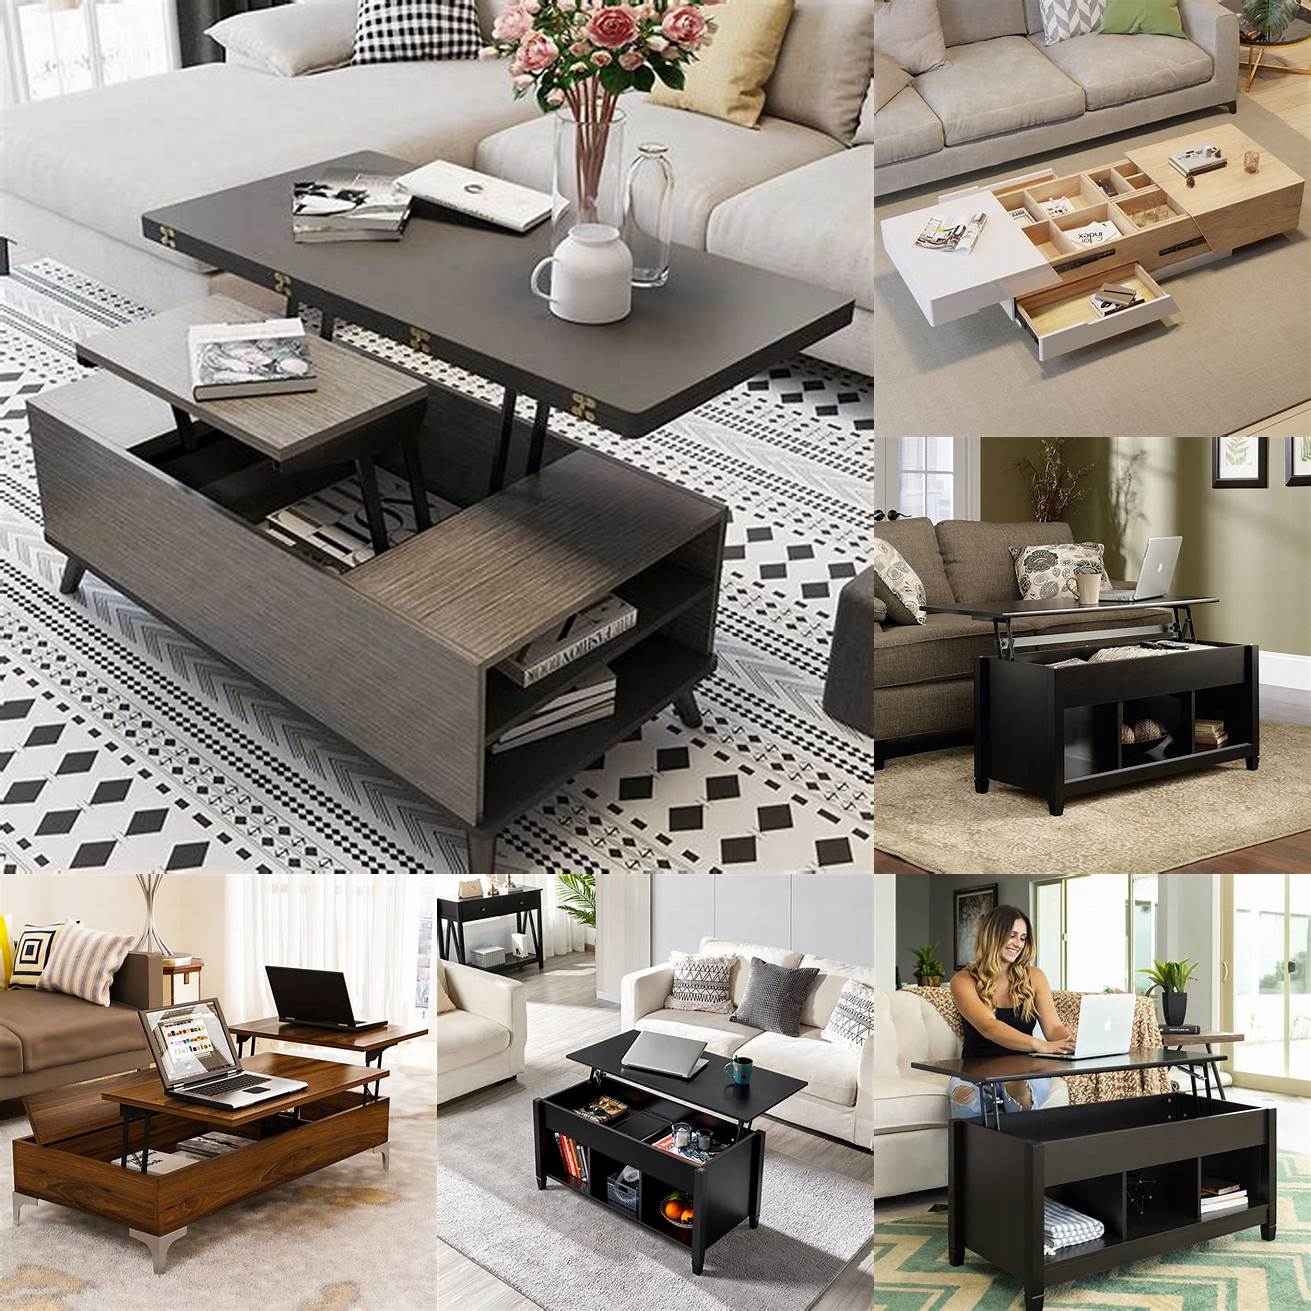 A coffee table with hidden storage can double as extra seating and storage